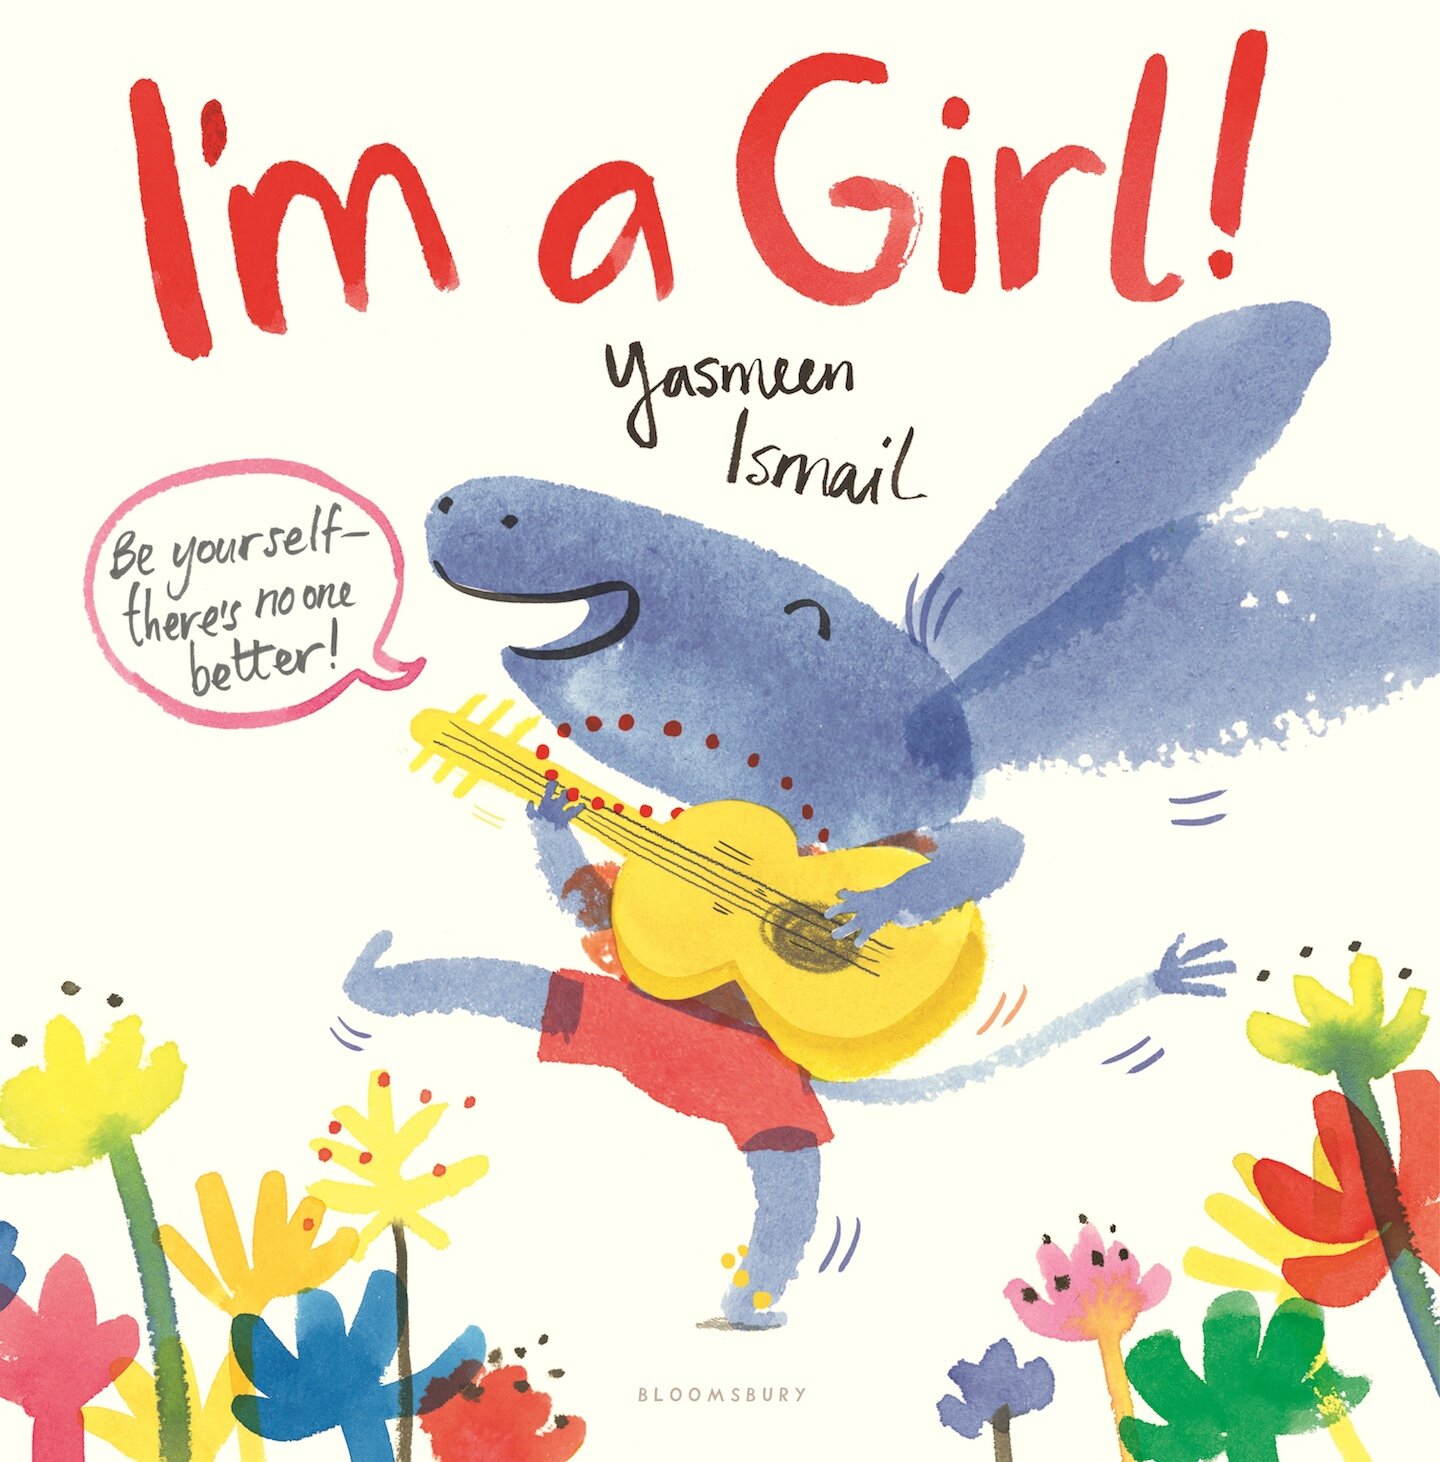 I'm A Girl cover small.jpg